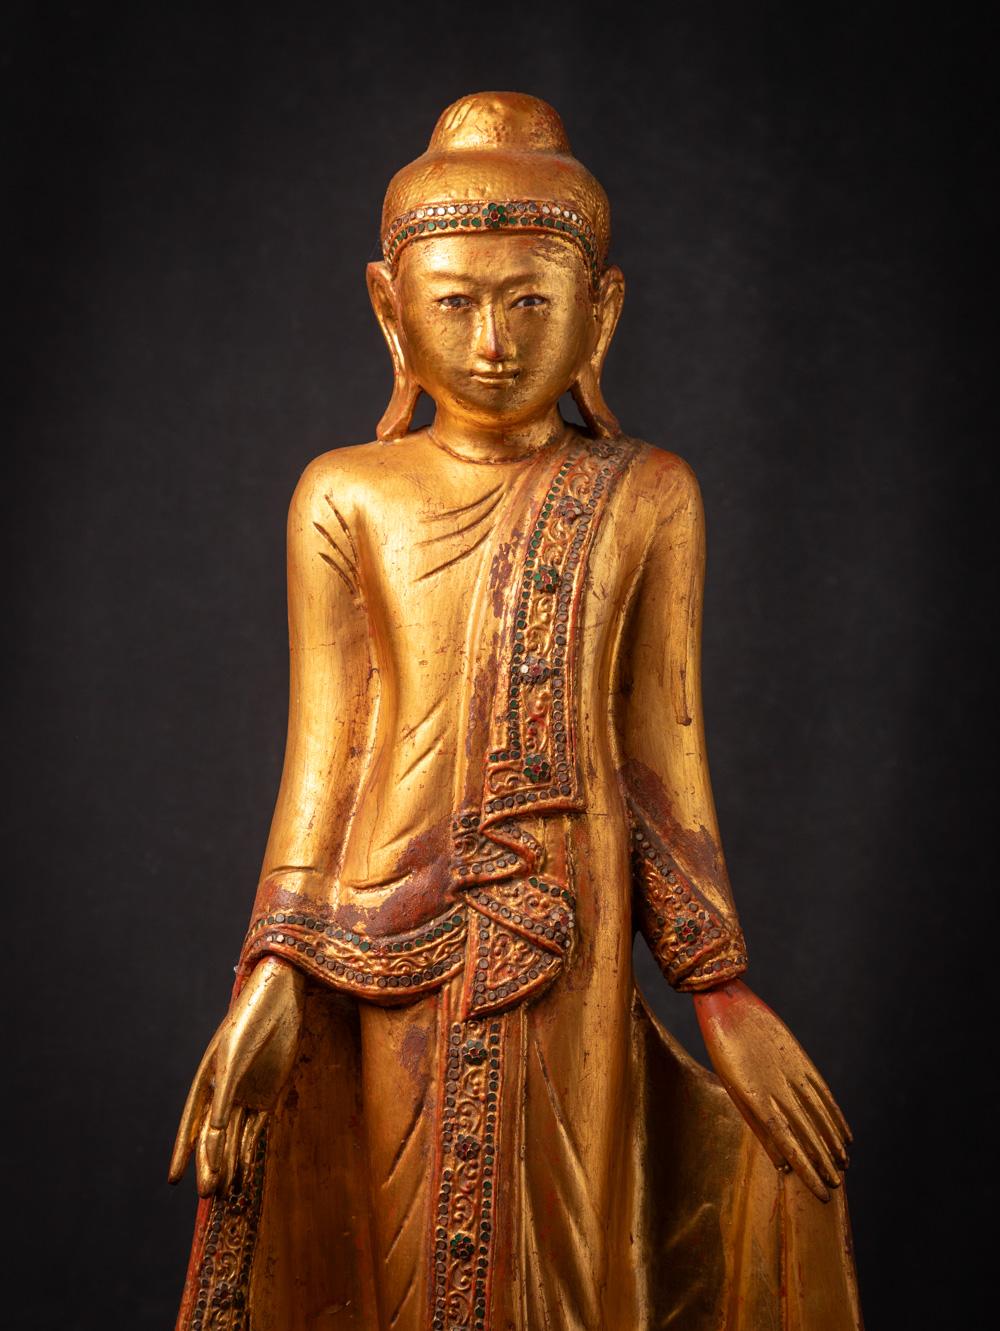 This Antique wooden Mandalay Buddha statue from Burma during the Early 20th century, is a fine example of Mandalay style craftsmanship. It stands at a height of 89 cm and boasts dimensions of 35,8 cm in width and 20,1 cm in depth, making it a